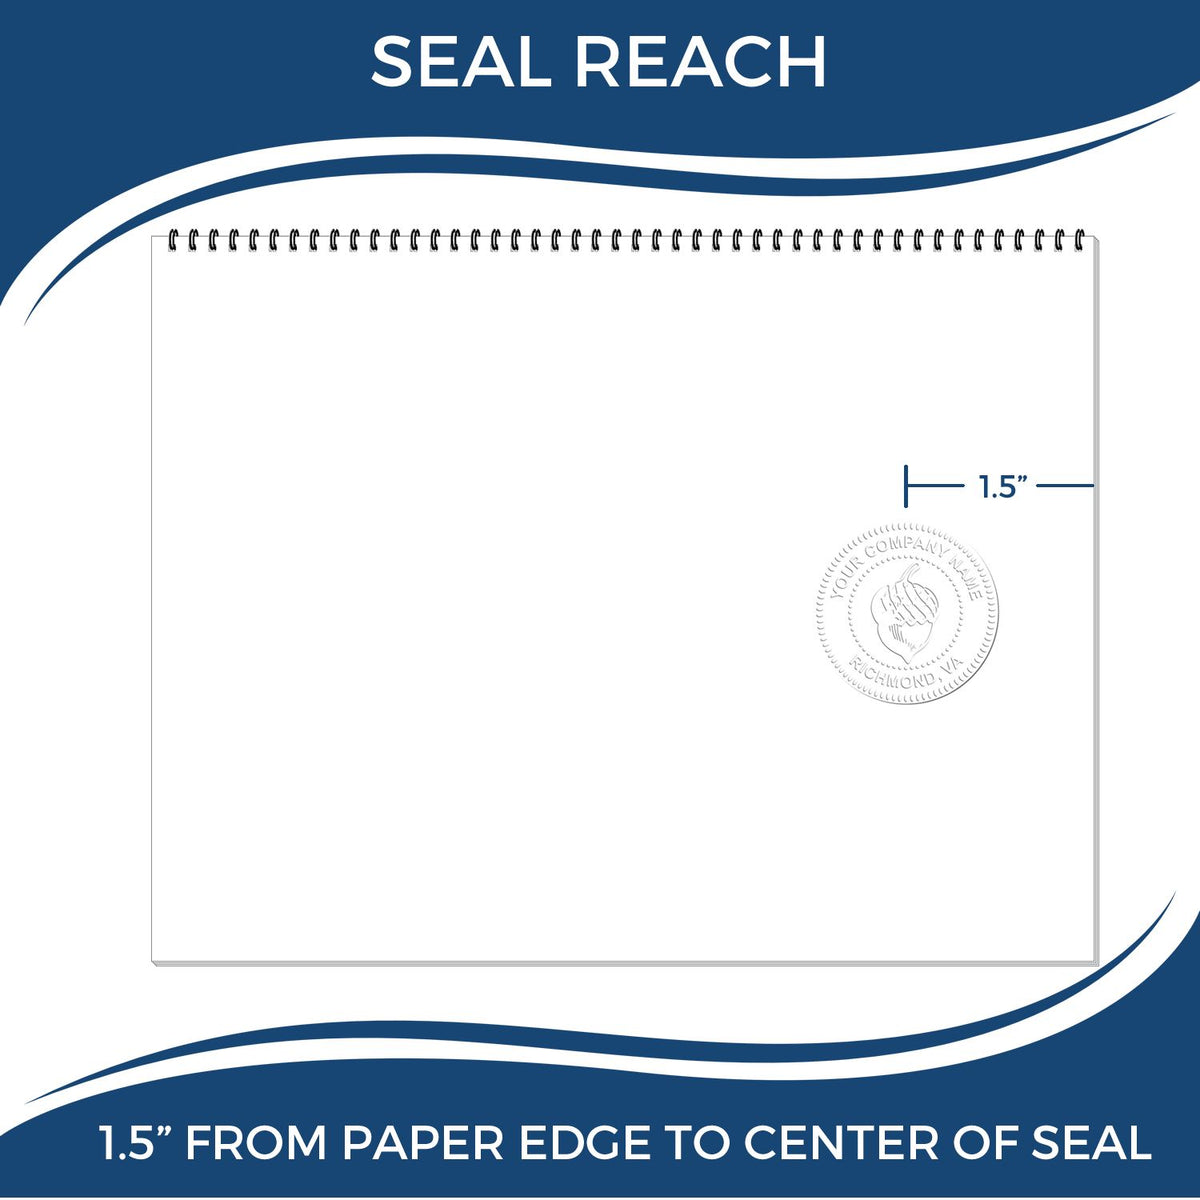 An infographic showing the seal reach which is represented by a ruler and a miniature seal image of the Handheld Alaska Professional Engineer Embosser